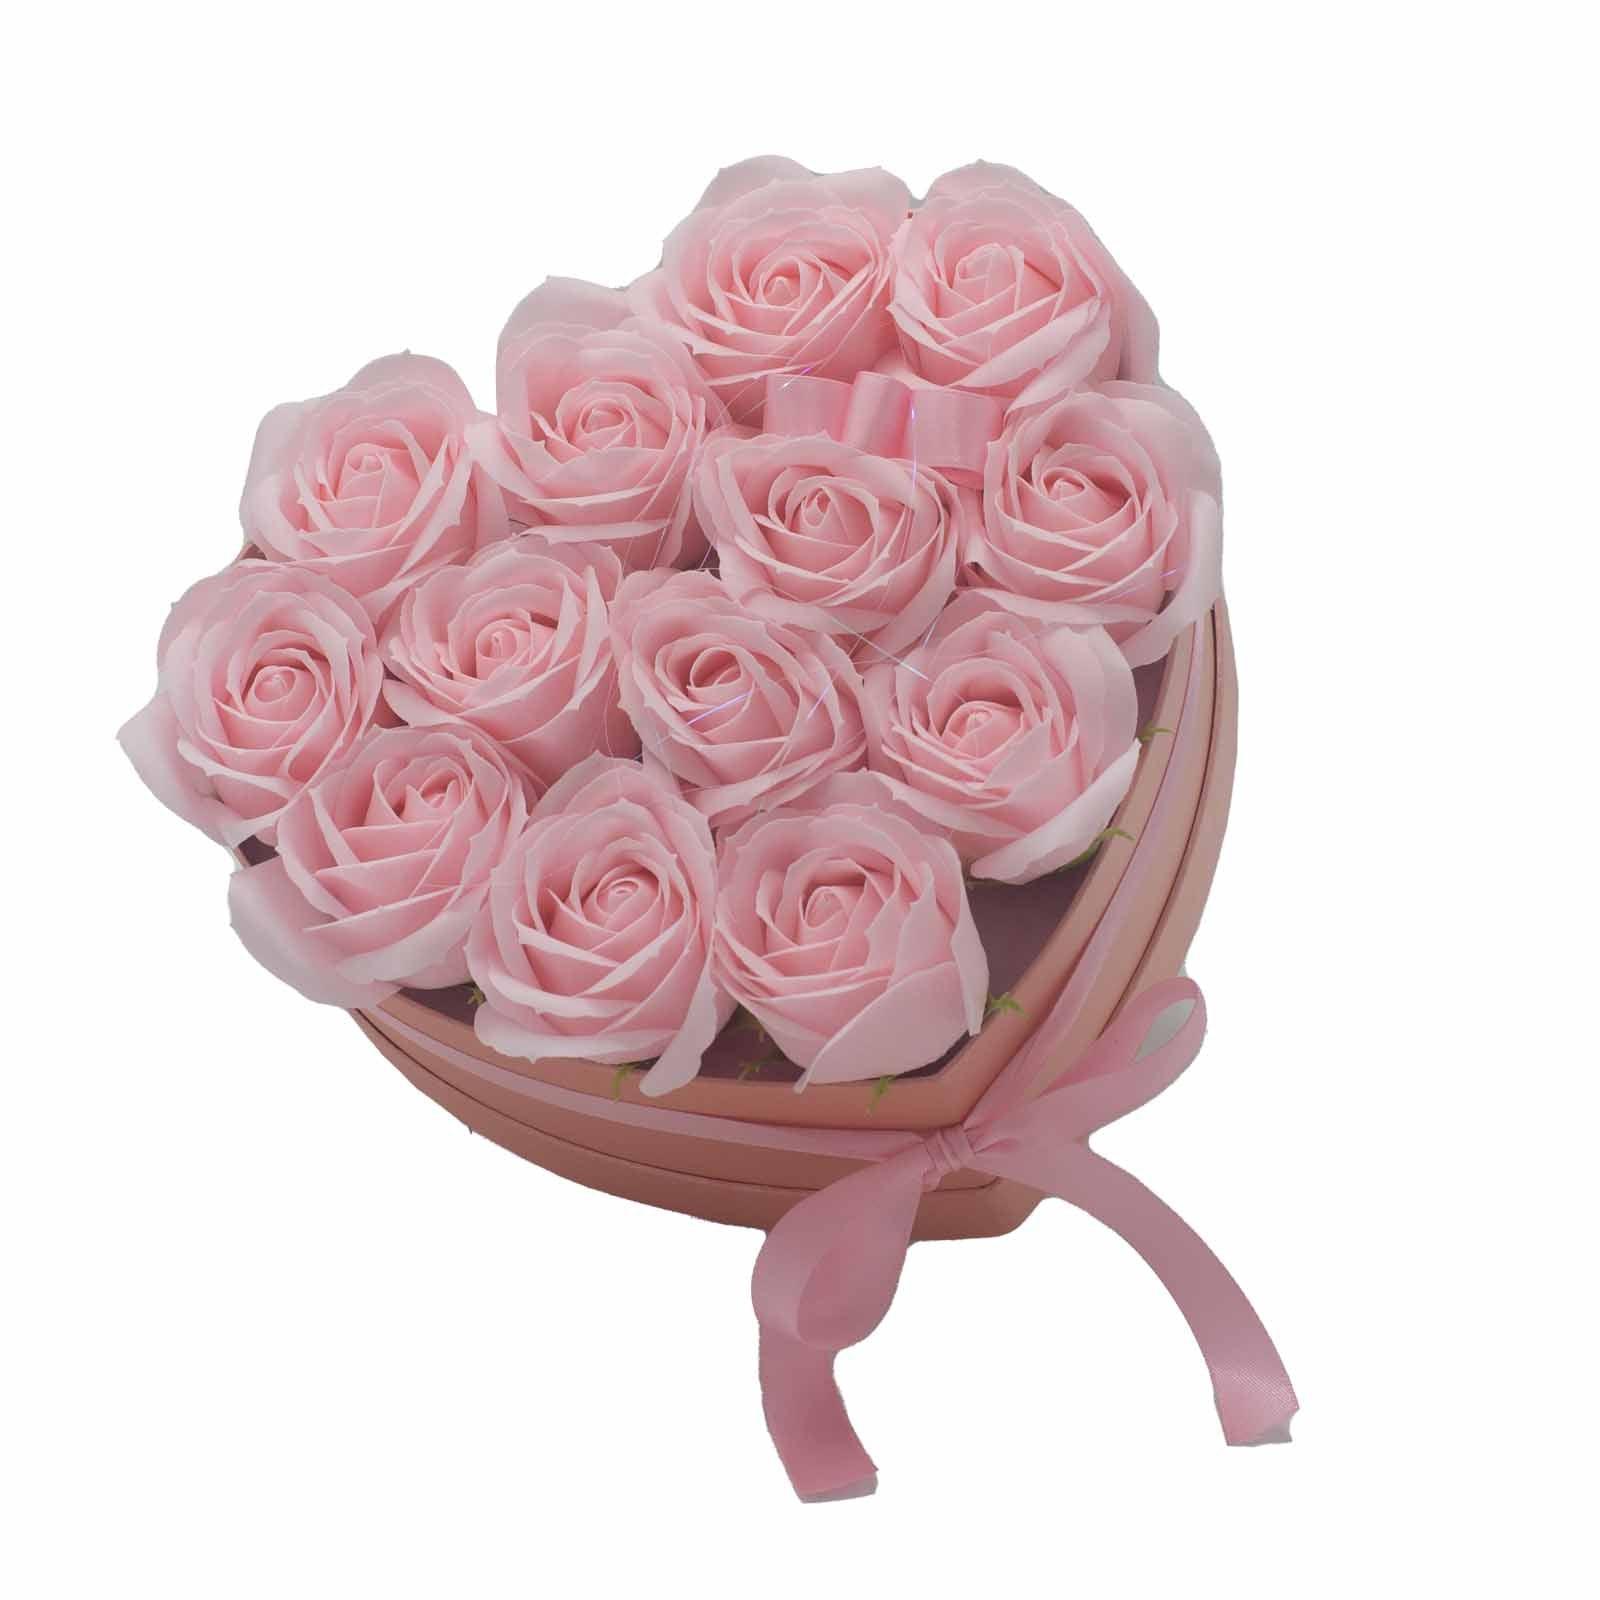 Soap Flower Bouquet - 13 Pink Roses - Heart - Charming Spaces